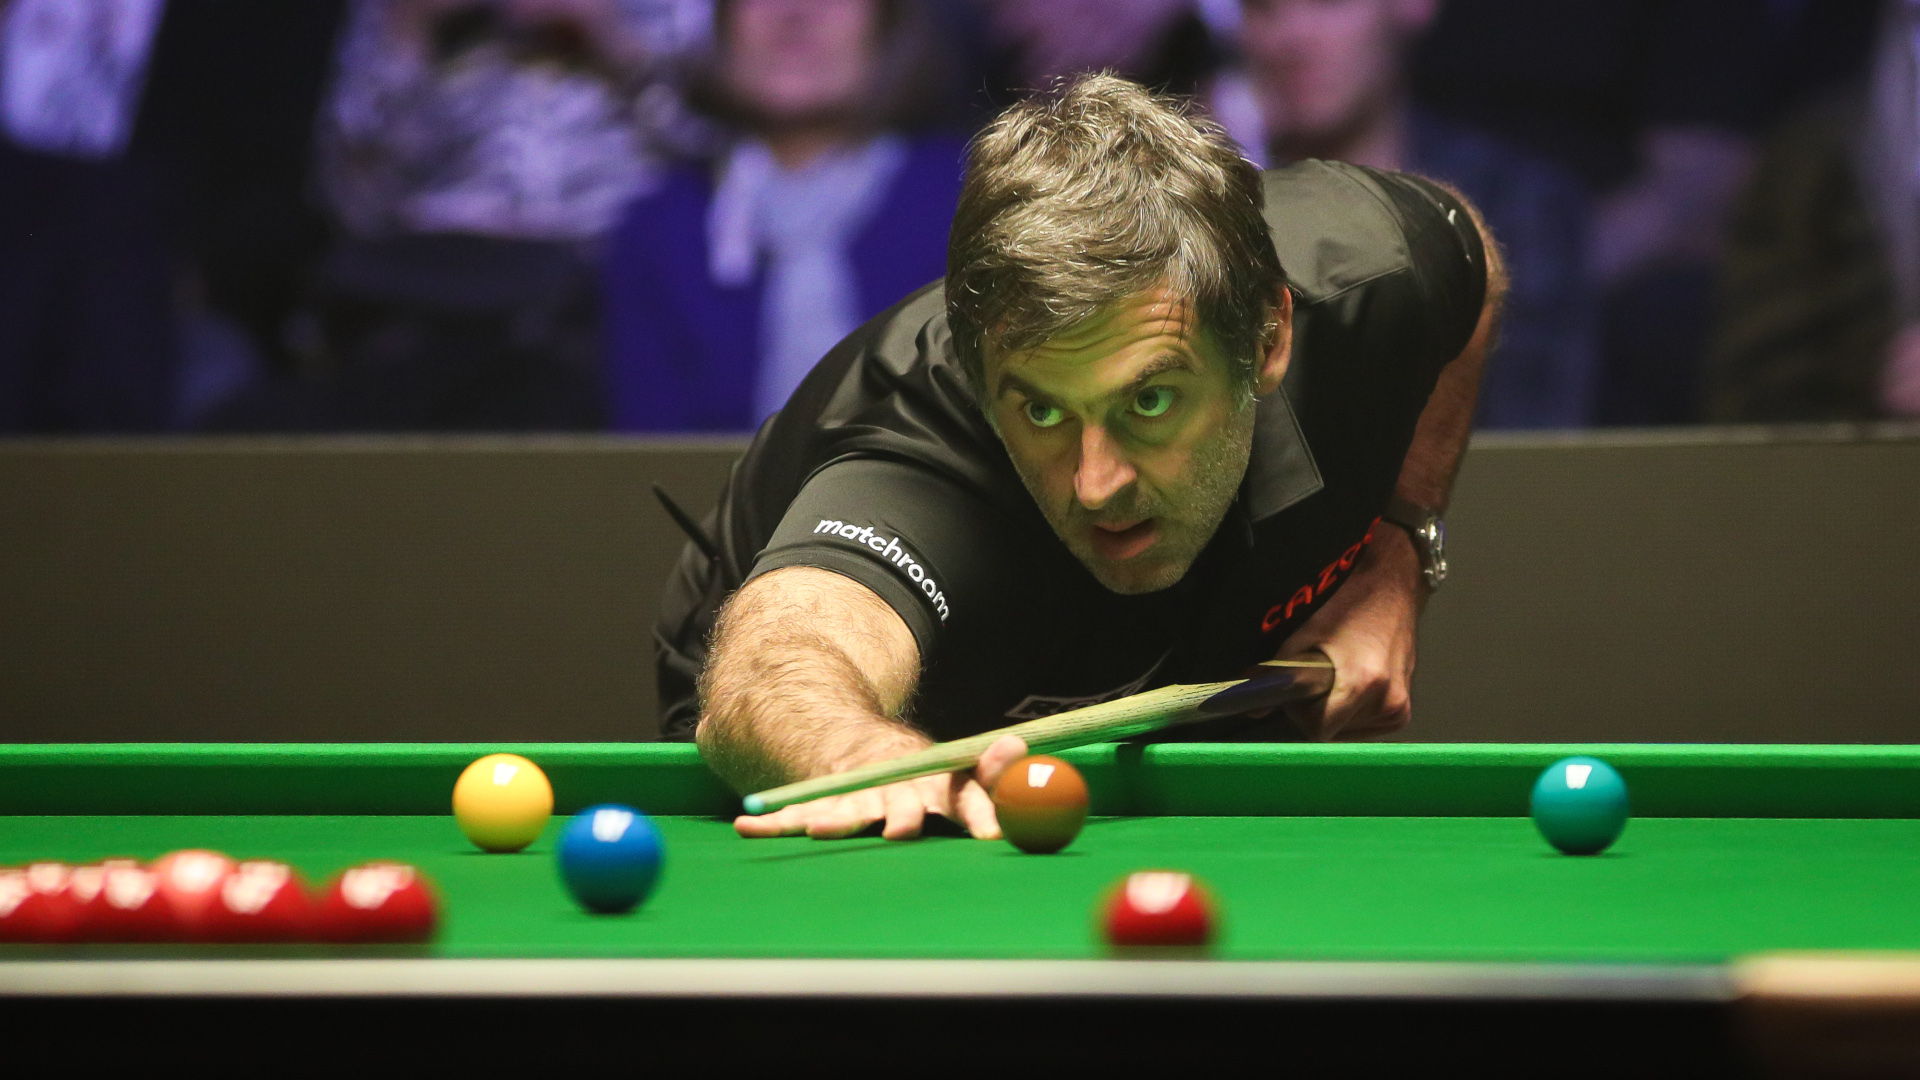 UK Championship snooker live stream 2022 how to watch online from anywhere TechRadar